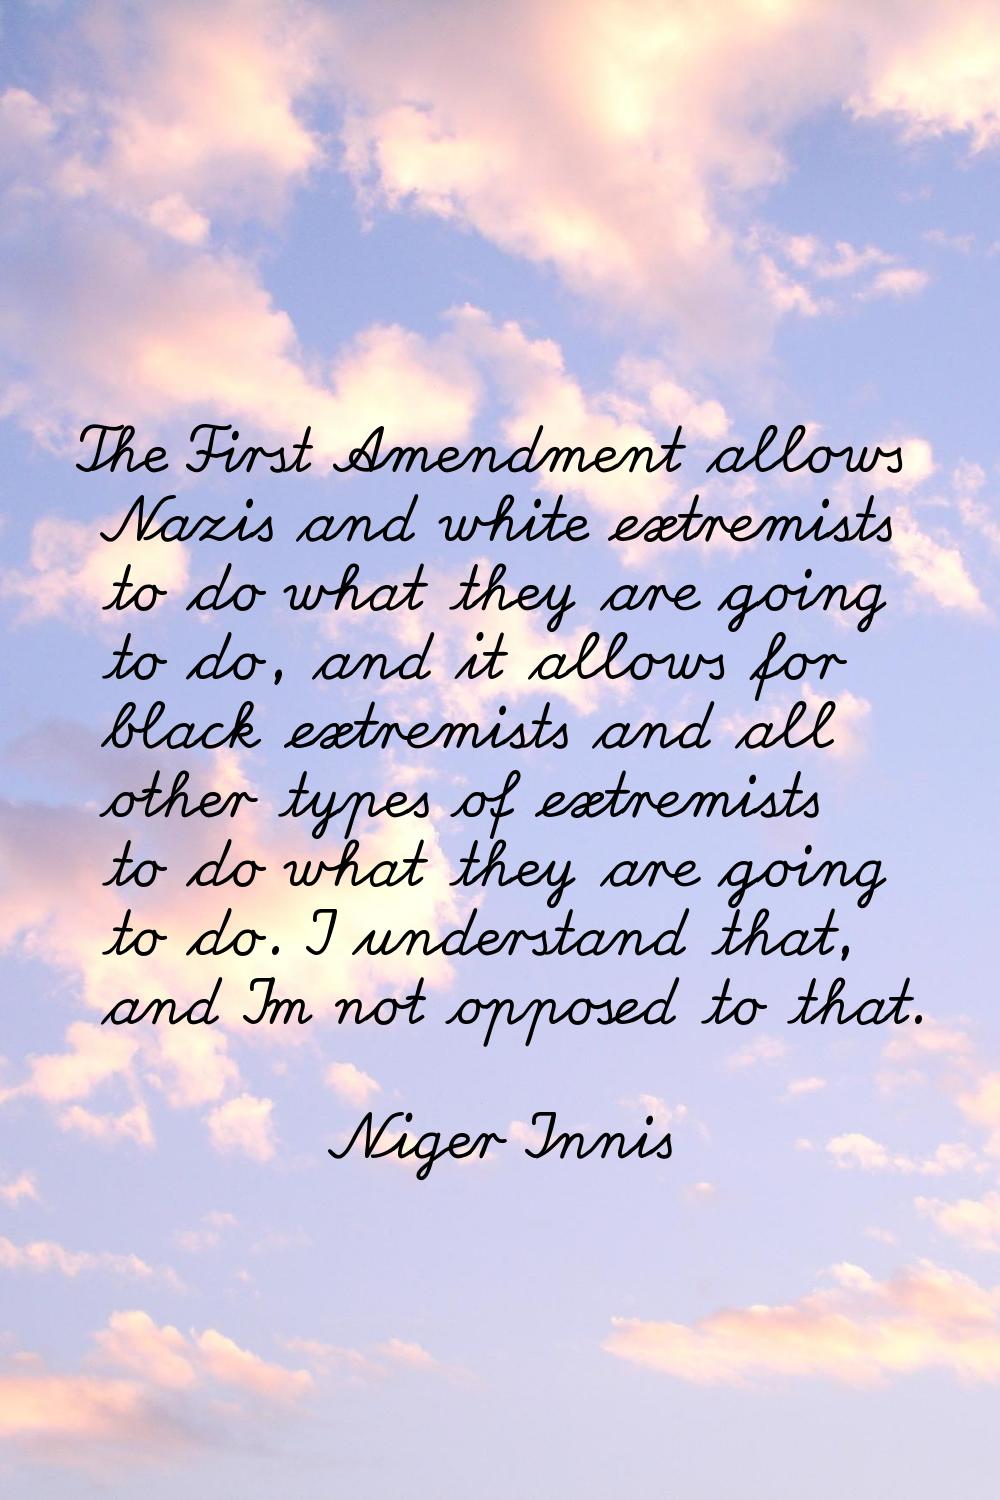 The First Amendment allows Nazis and white extremists to do what they are going to do, and it allow